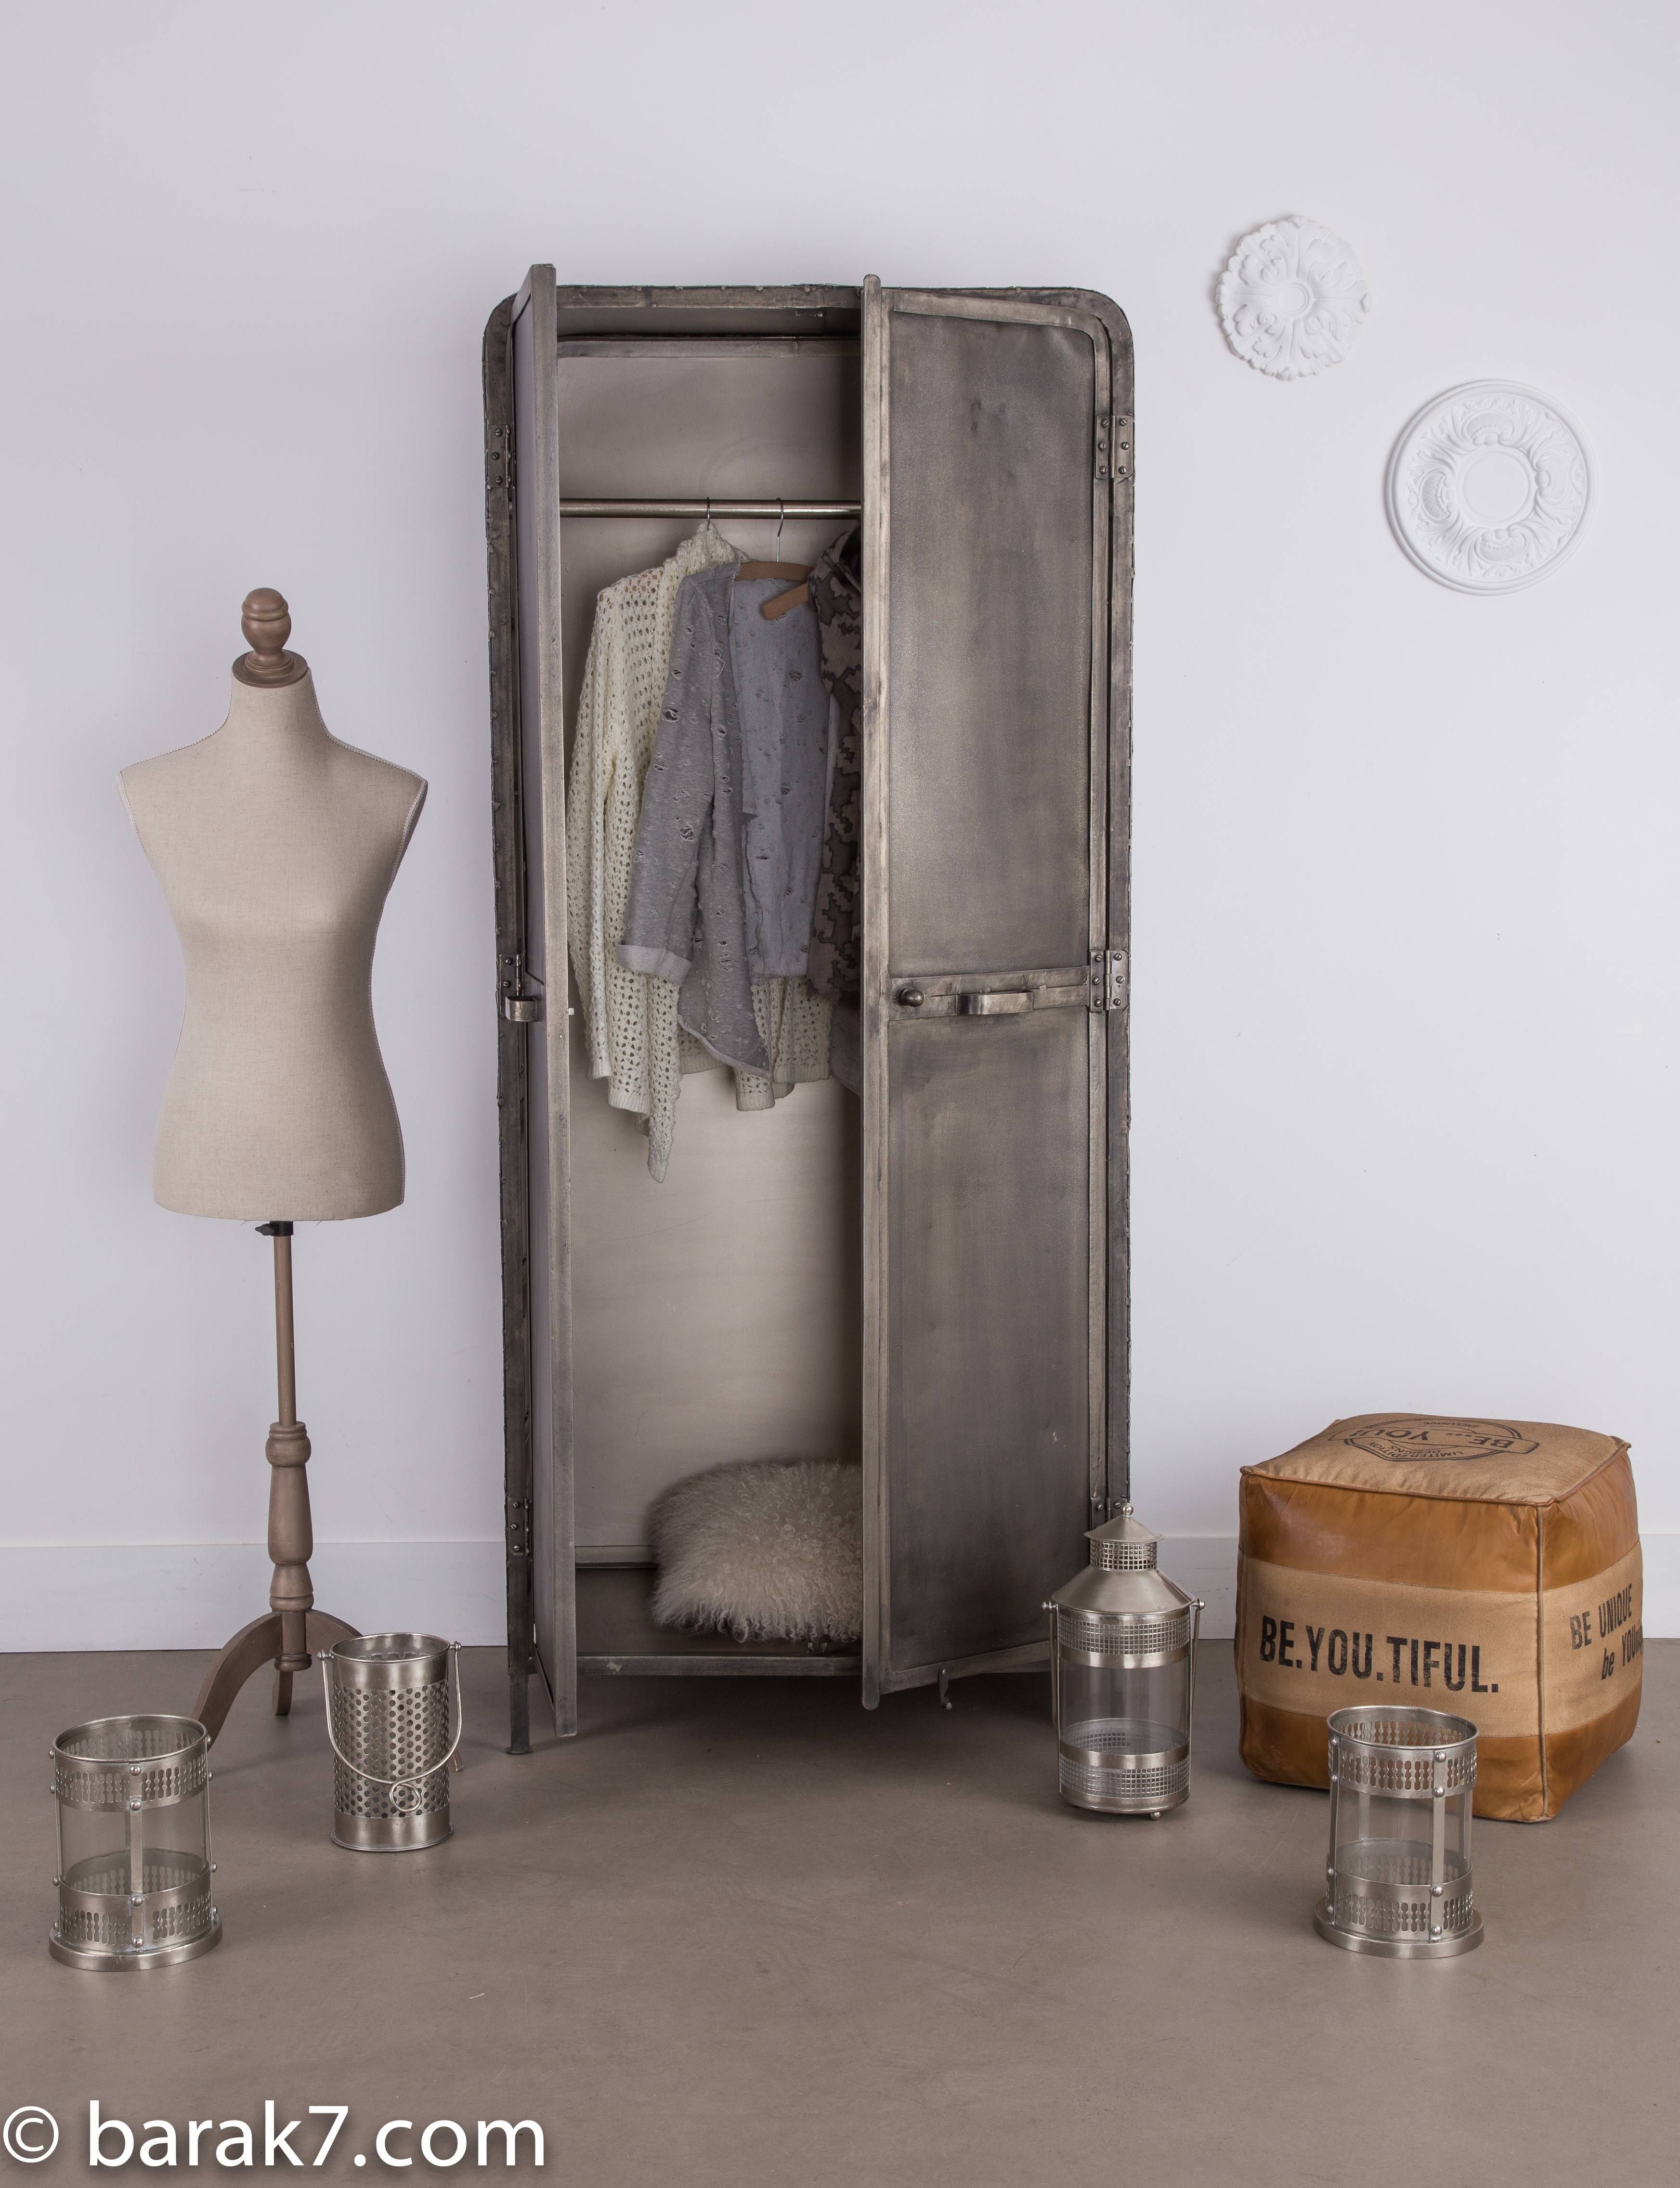 New Industrial Style Furniture Range From Barak'7 | The Art Of With Regard To Industrial Style Wardrobes (View 1 of 15)